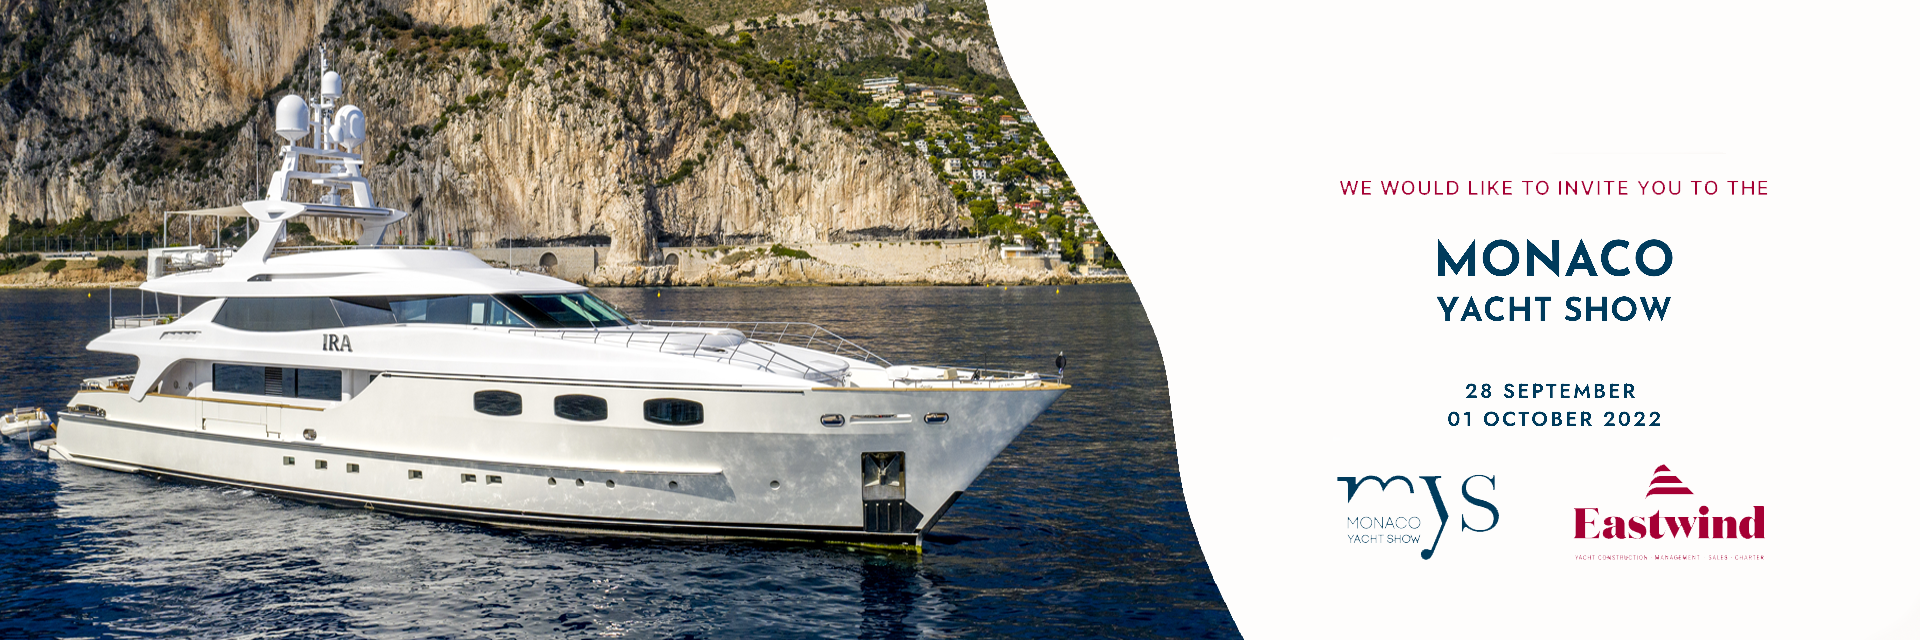 IRA will be on display  at Monaco Yacht Show 2022